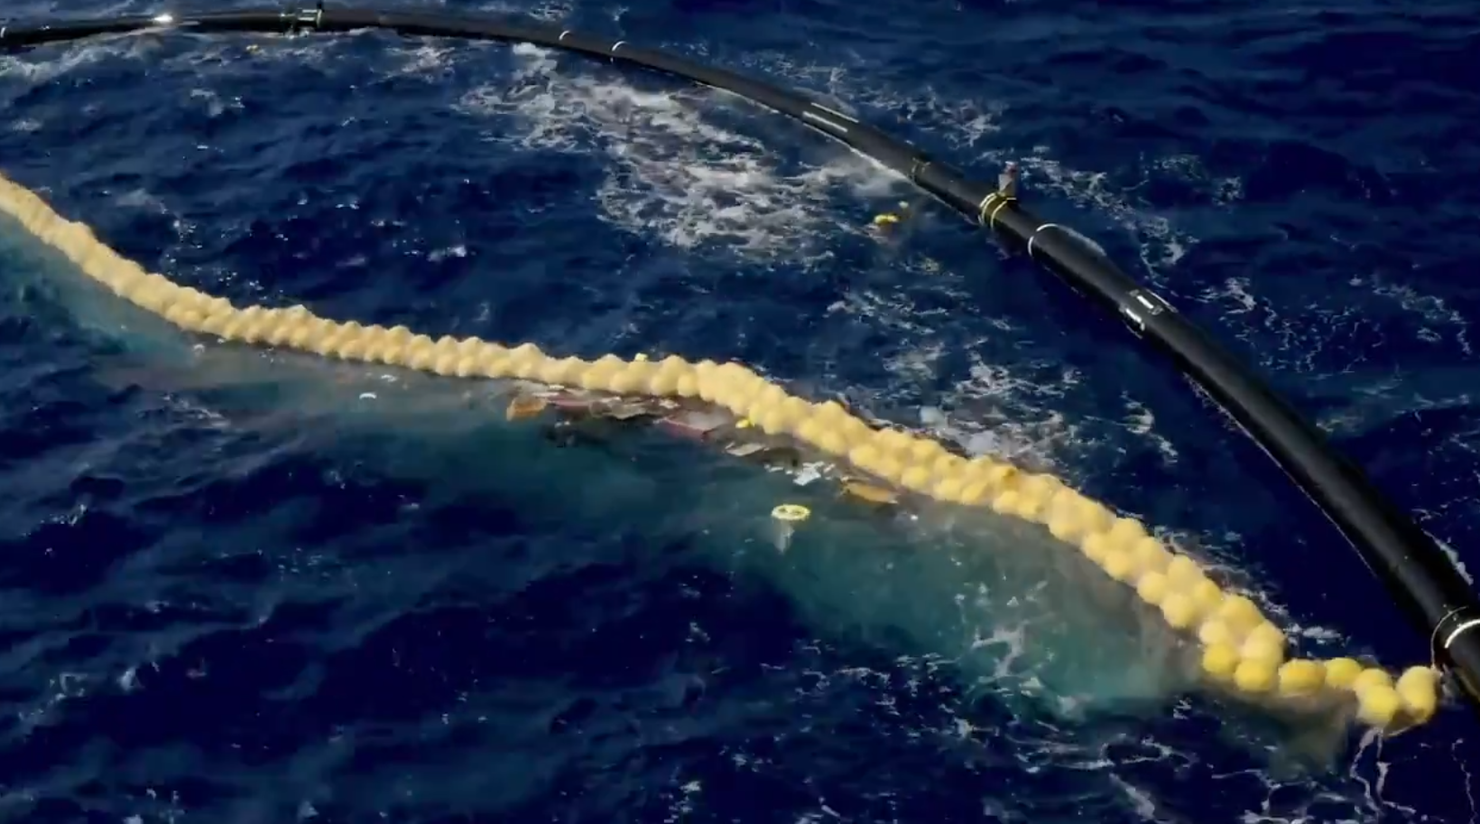 ocean cleanup device starts working